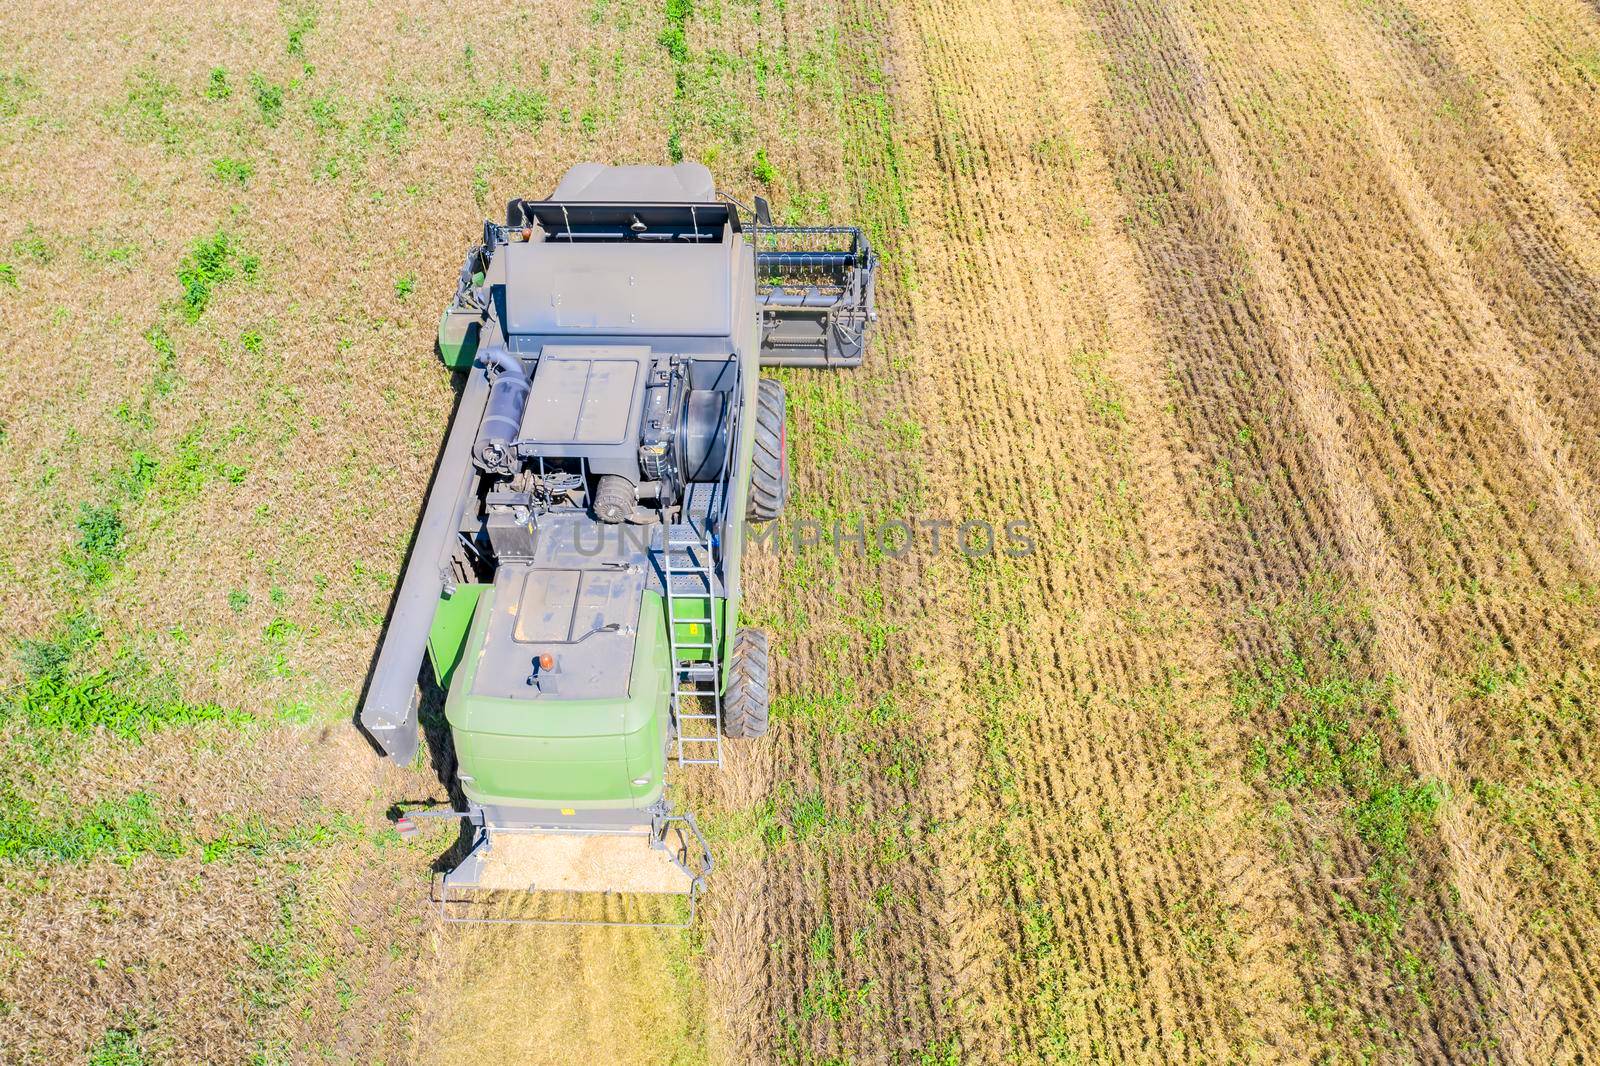 Above view of combine harvesting wheat field, agriculture field work